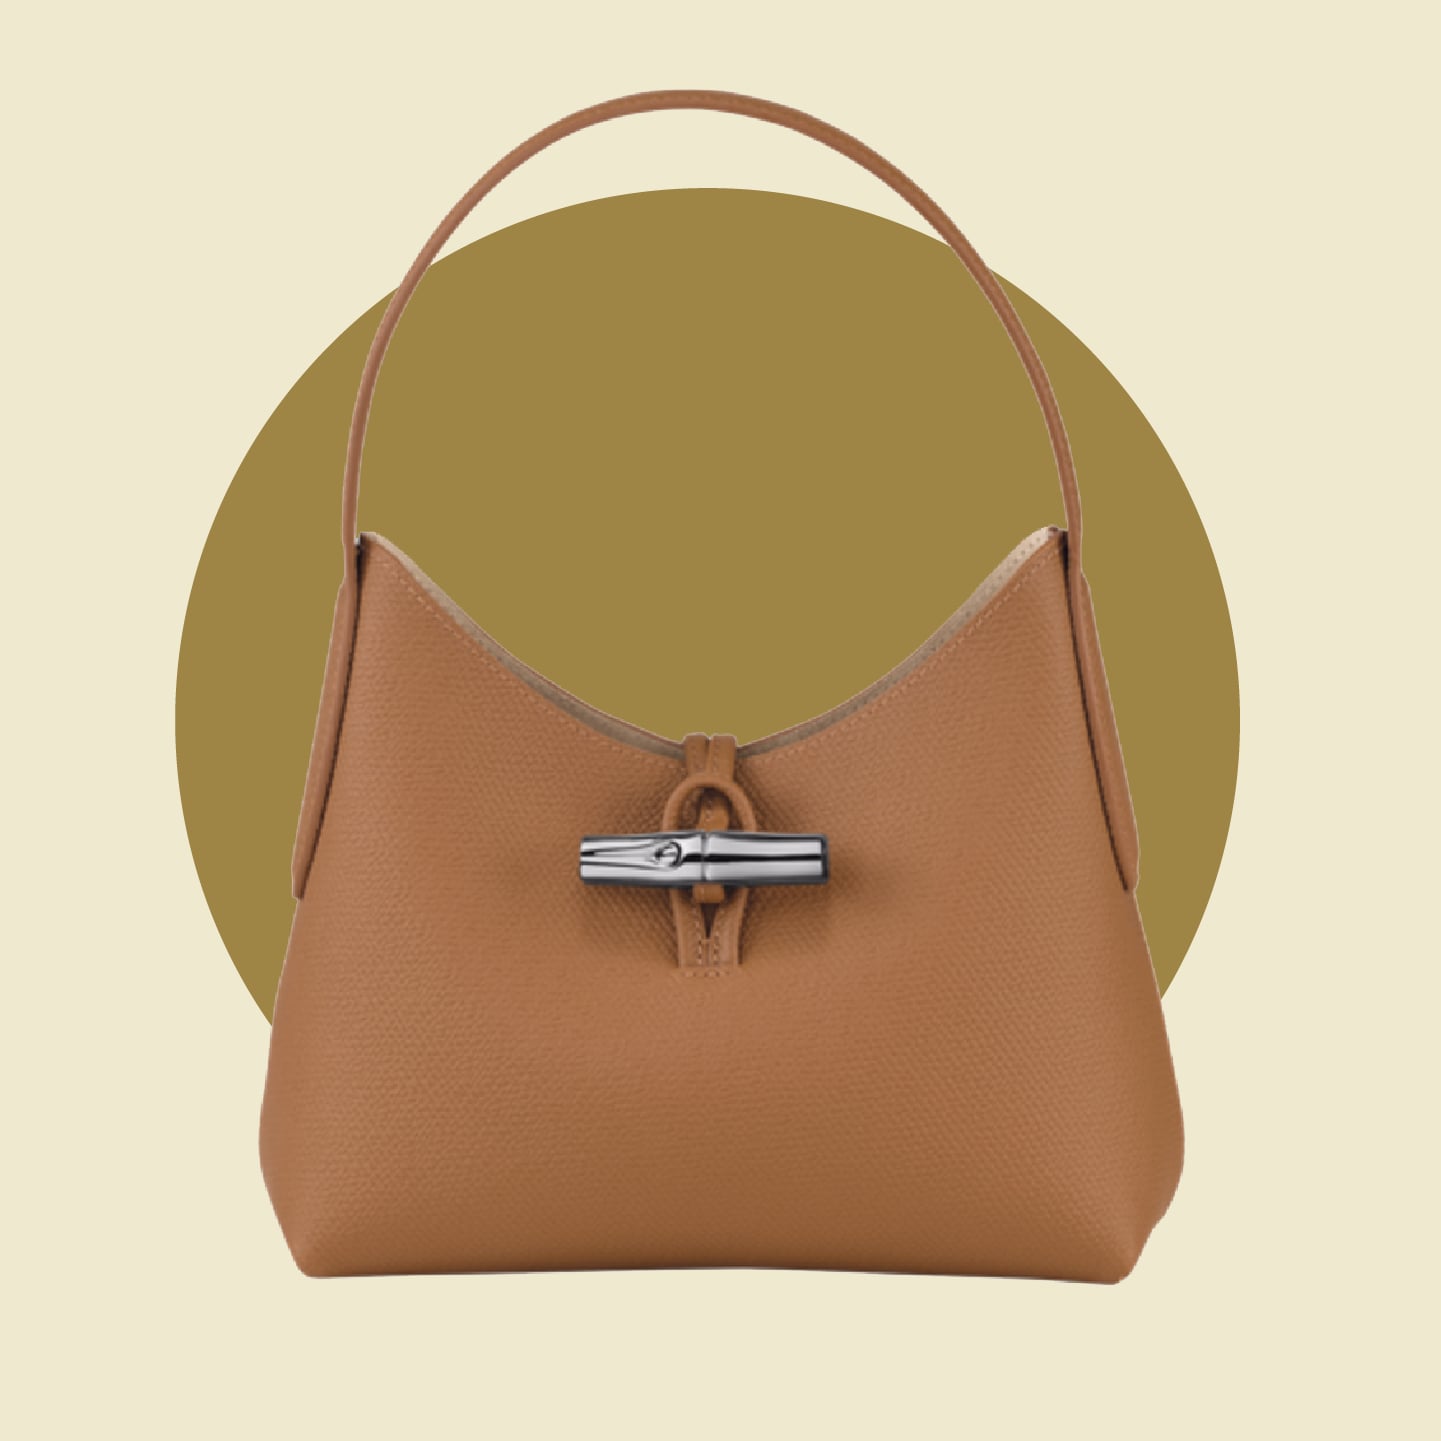 Longchamp: Longchamp Presents Its New Spring/Summer 2022 Ready-To